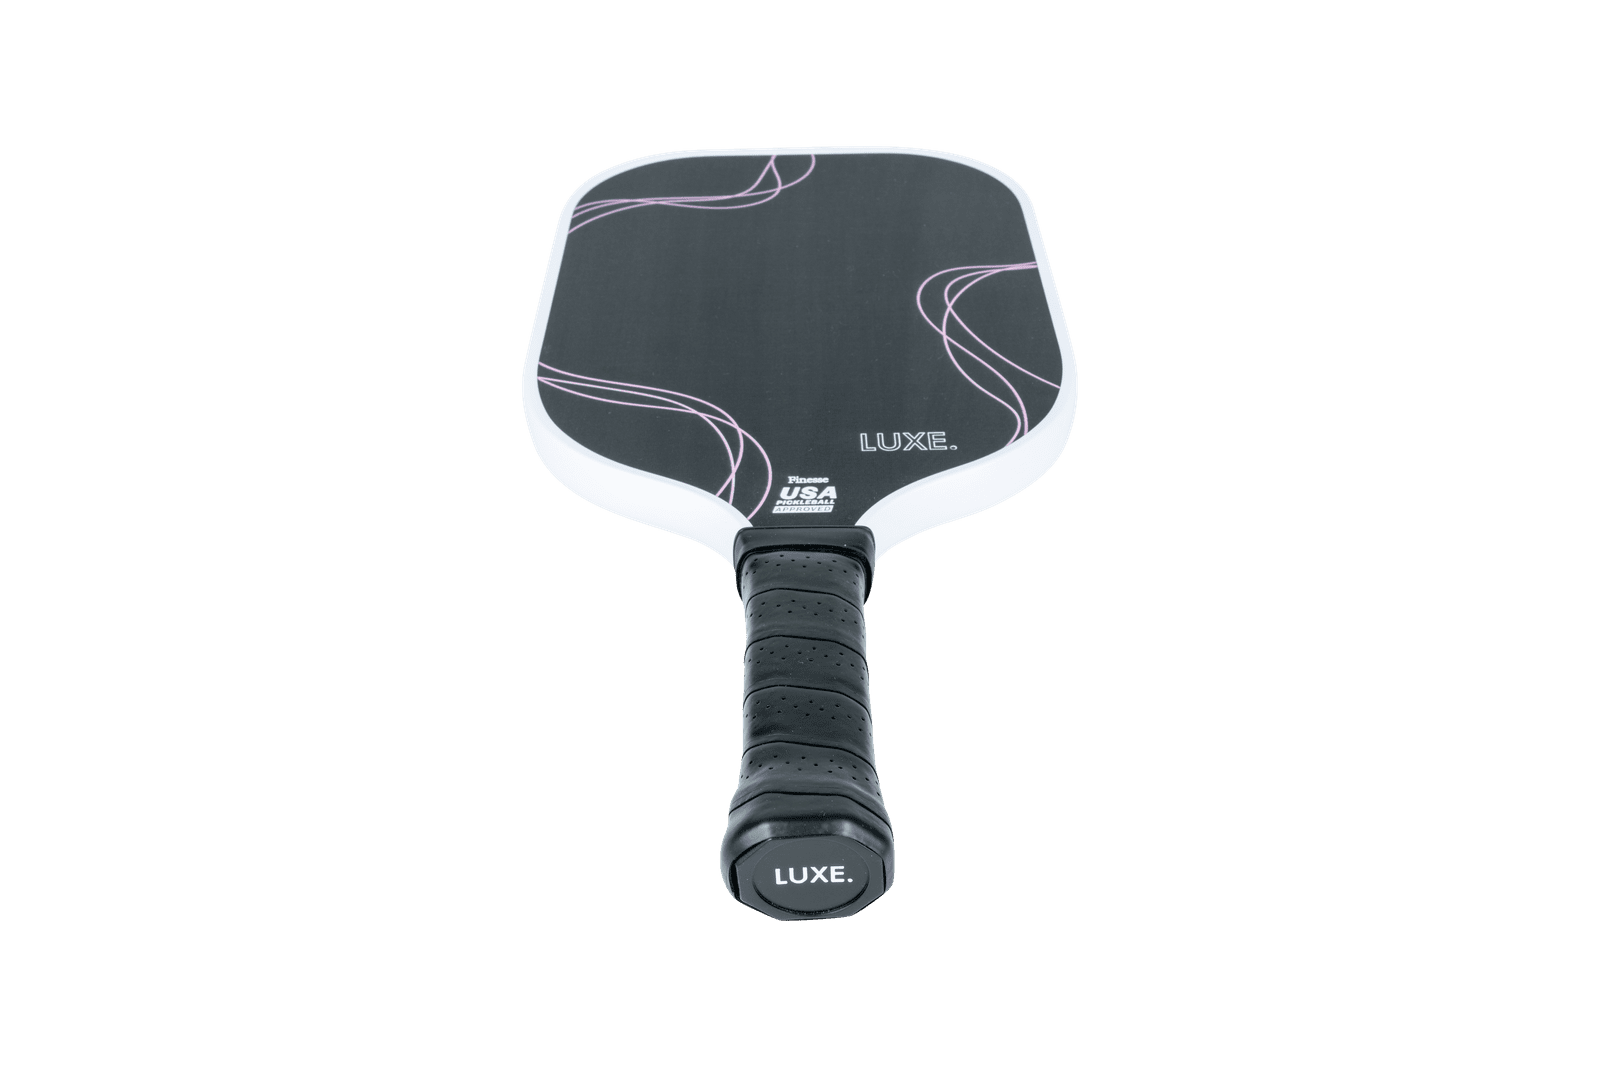 Finesse LUXE Pickleball Paddle. Cute and aesthetic pickleball paddles